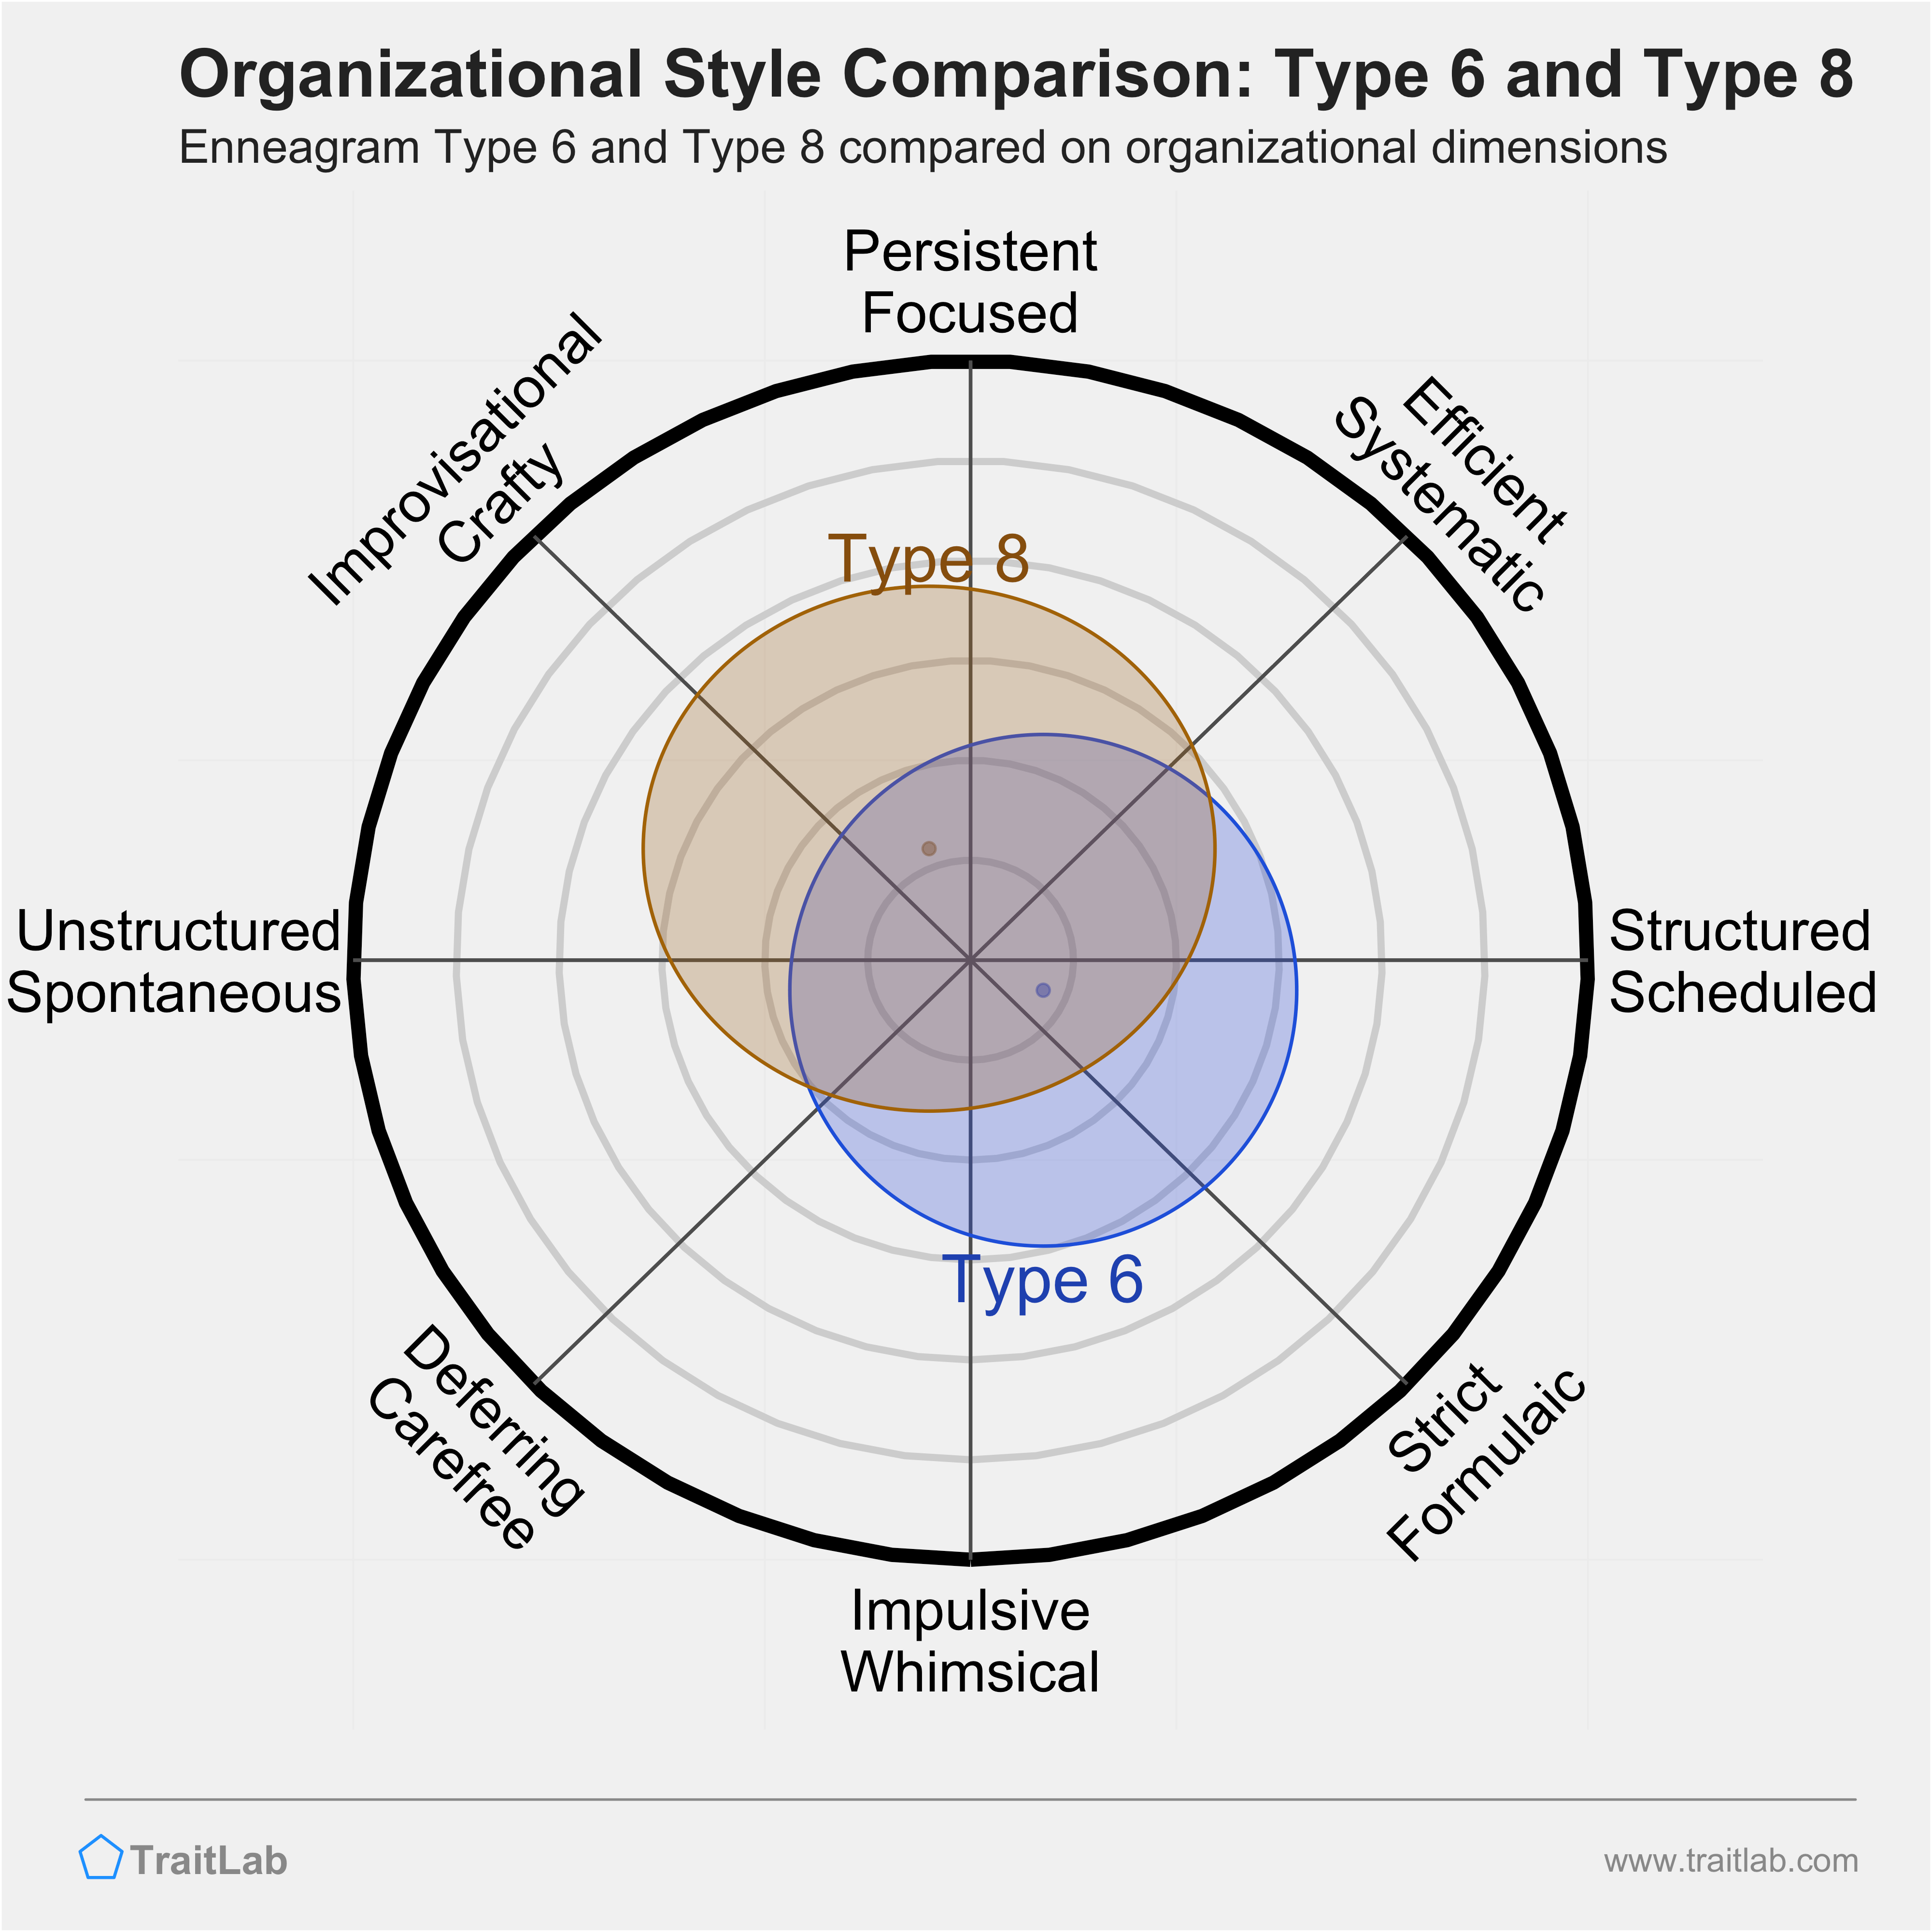 Type 6 and Type 8 comparison across organizational dimensions